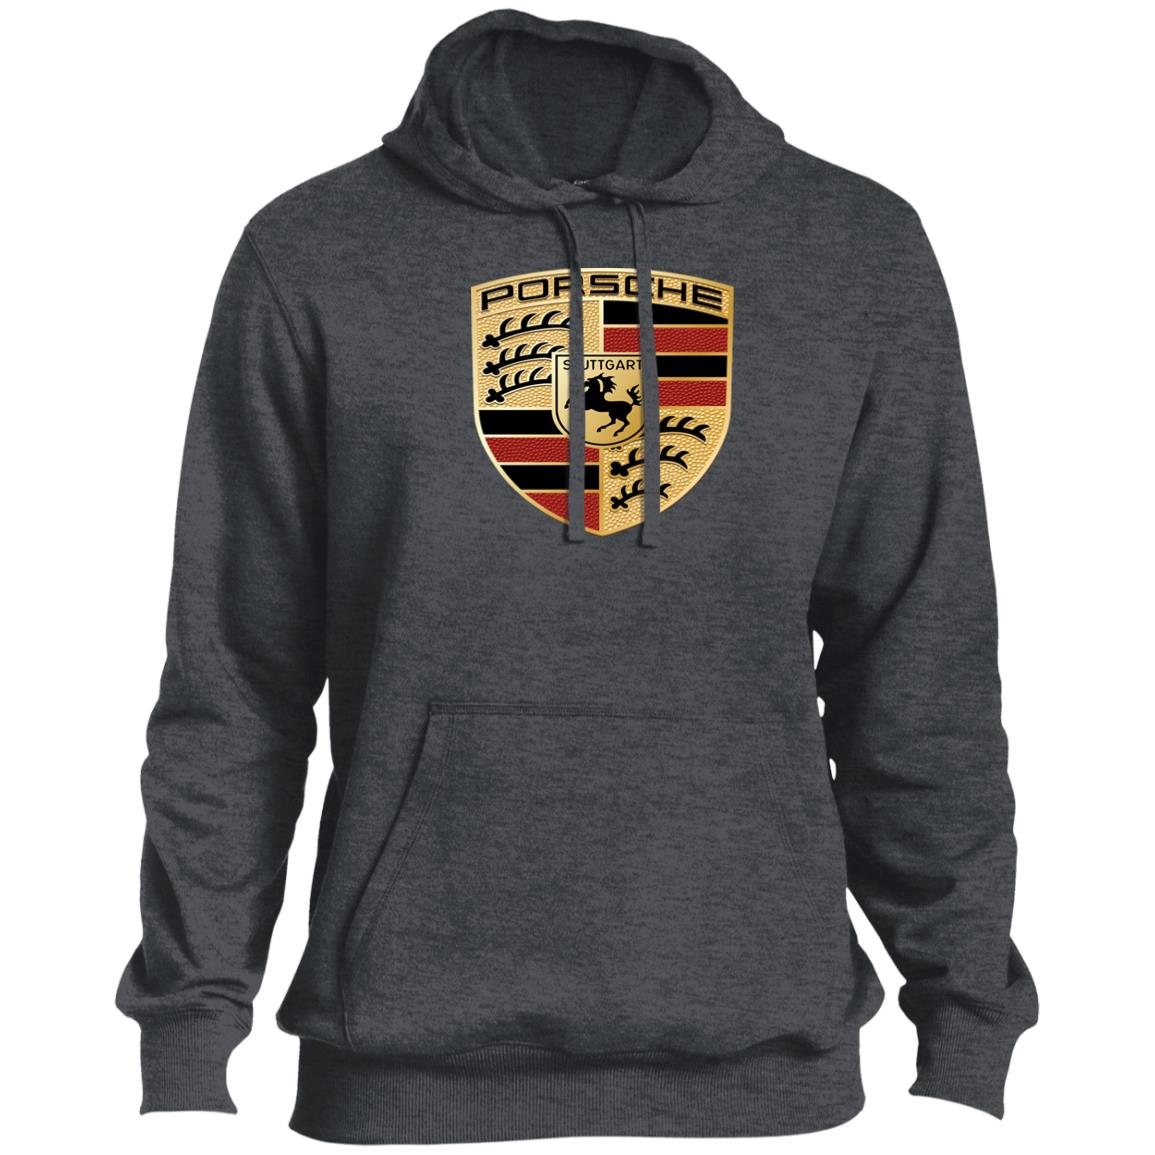 Porsche Tall Pullover Hoodie - My Car My Rules